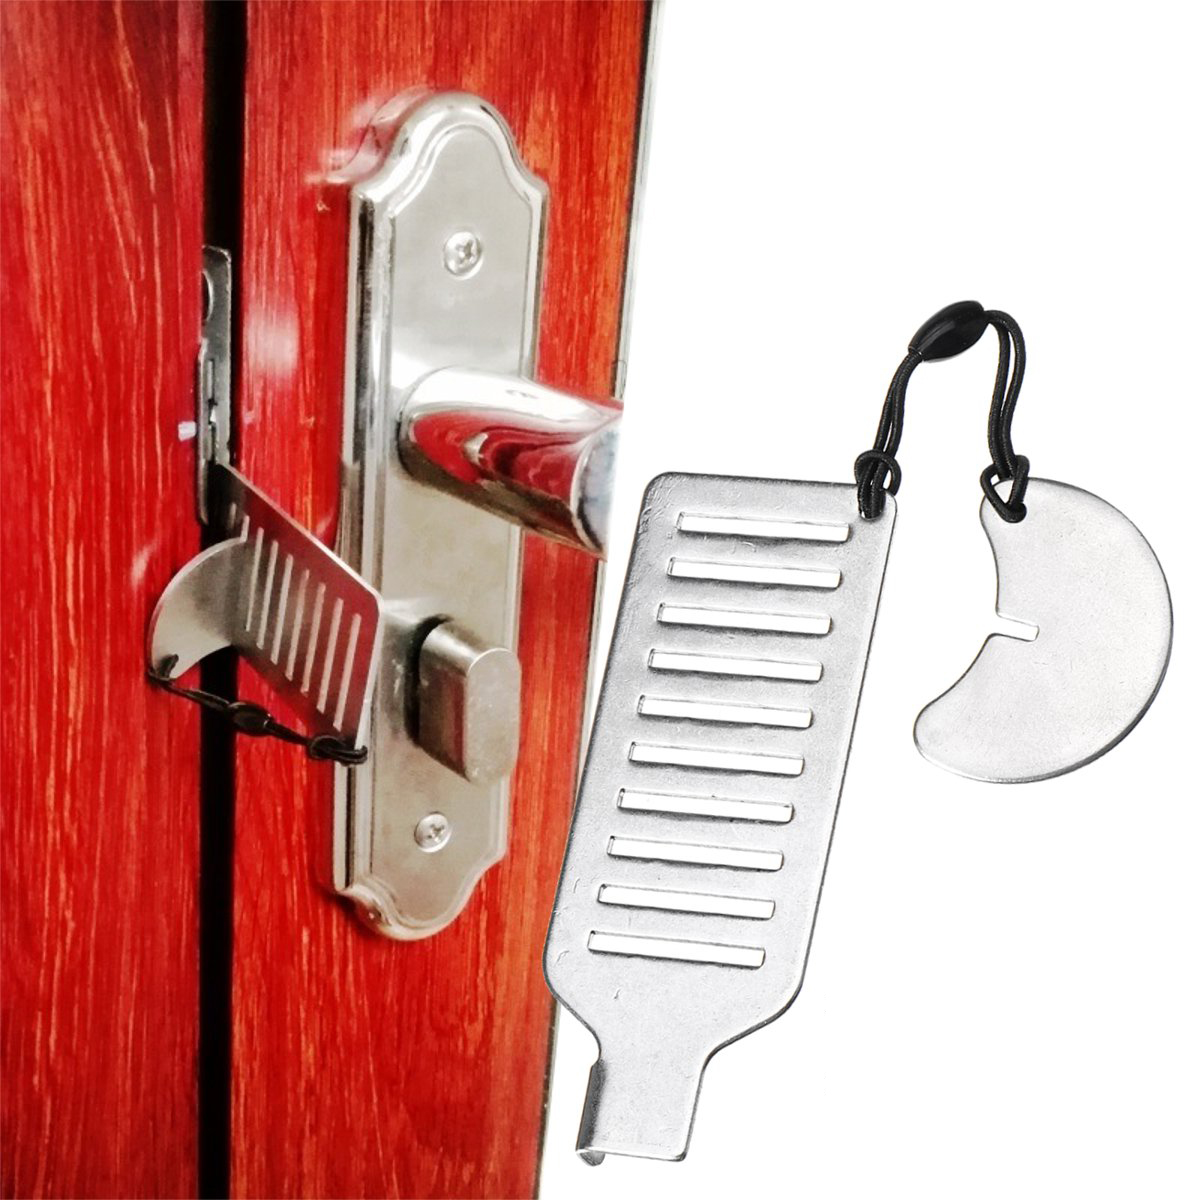 

Home Safety Door Stopper Portable Gate Lock Office Traveling Hotel Security Tool